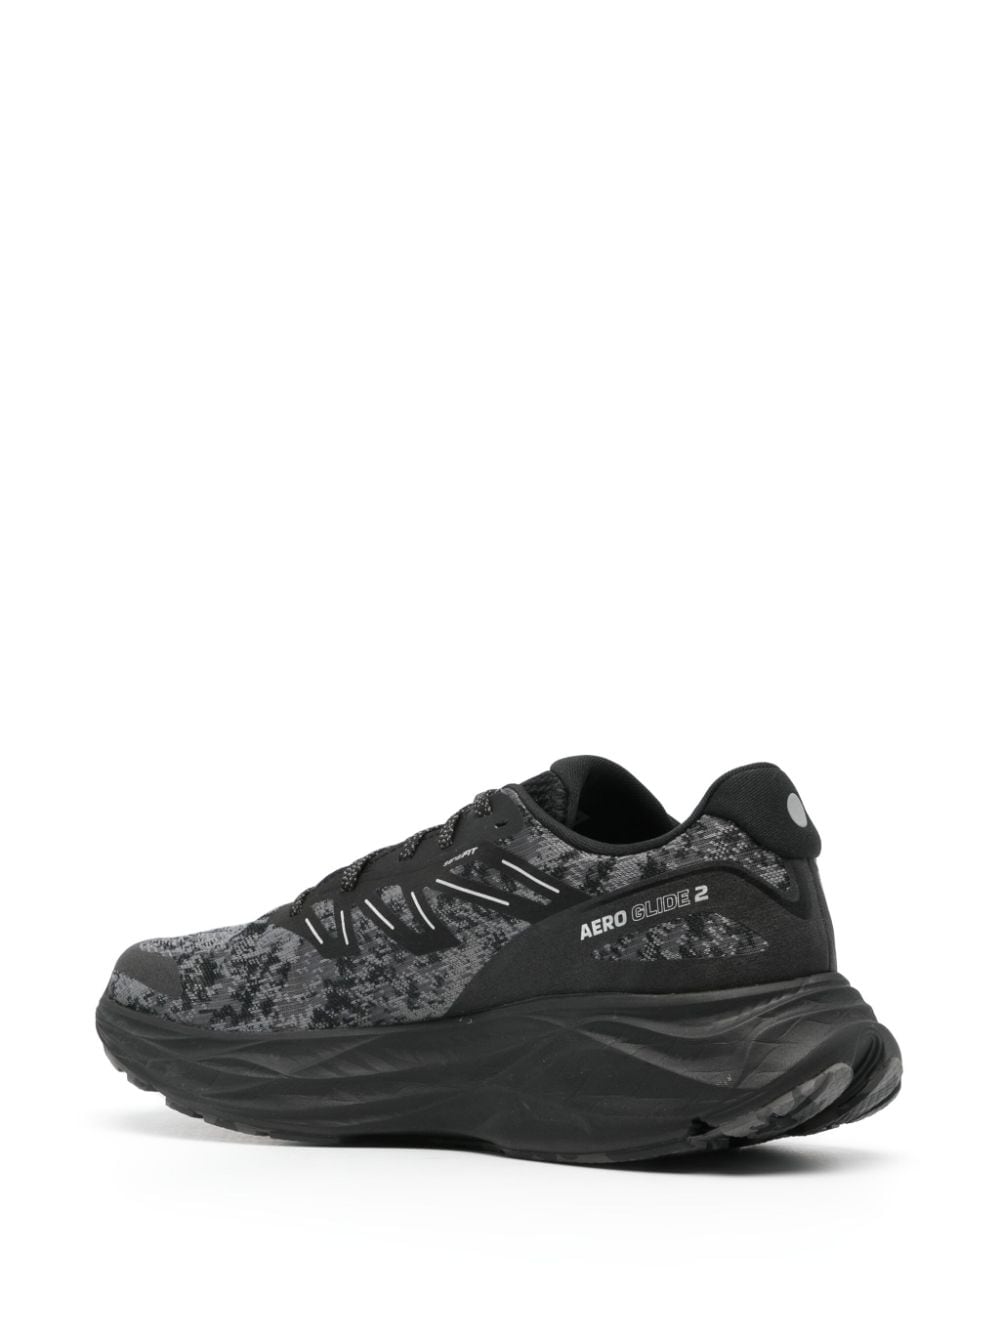 Aero Glide 2 running sneakers<BR/><BR/><BR/>